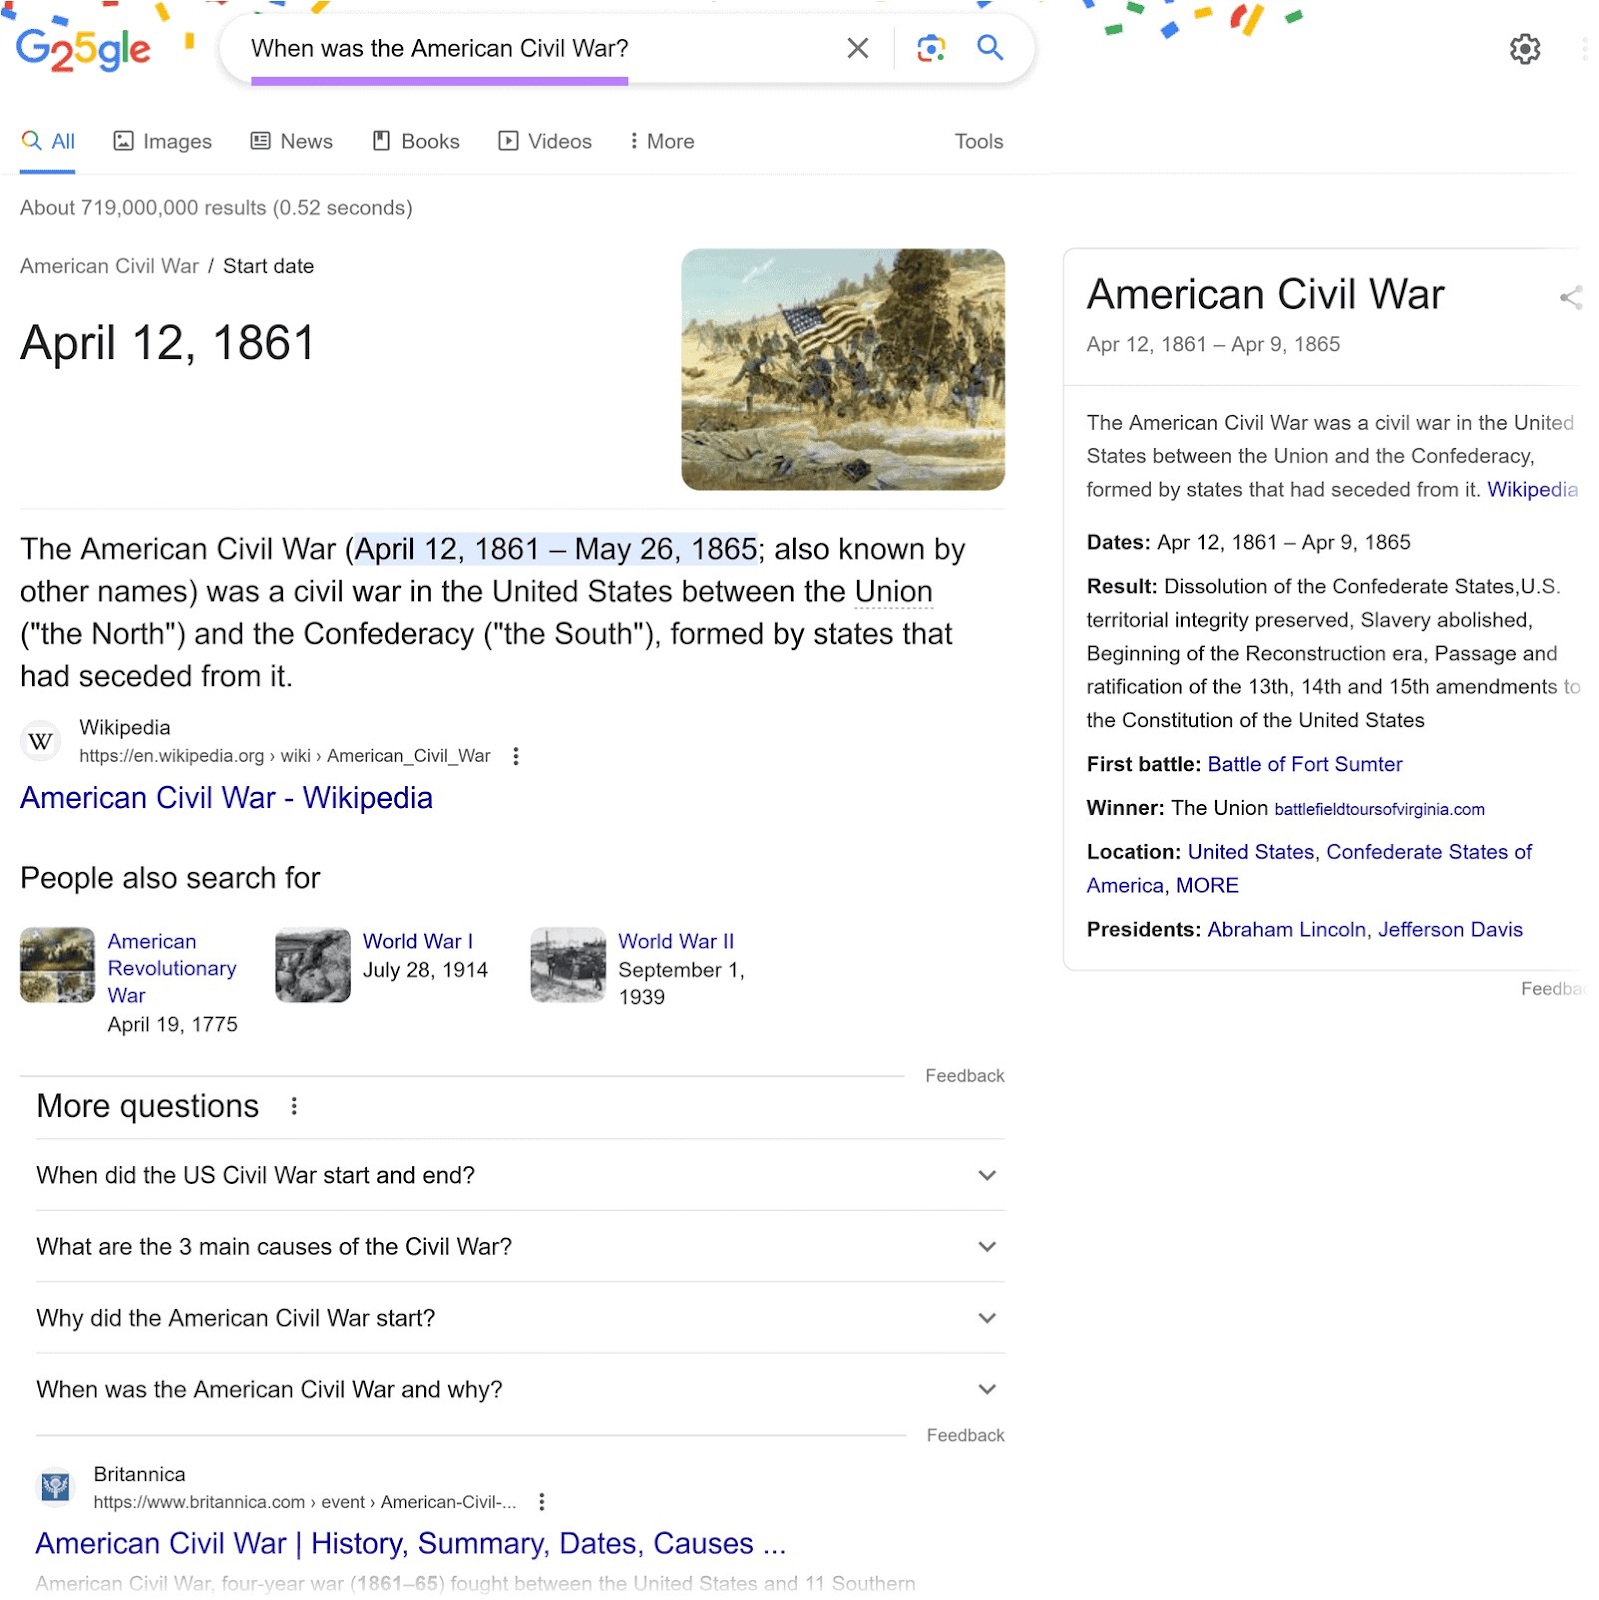 Google SERP for "When was the American Civil War?"